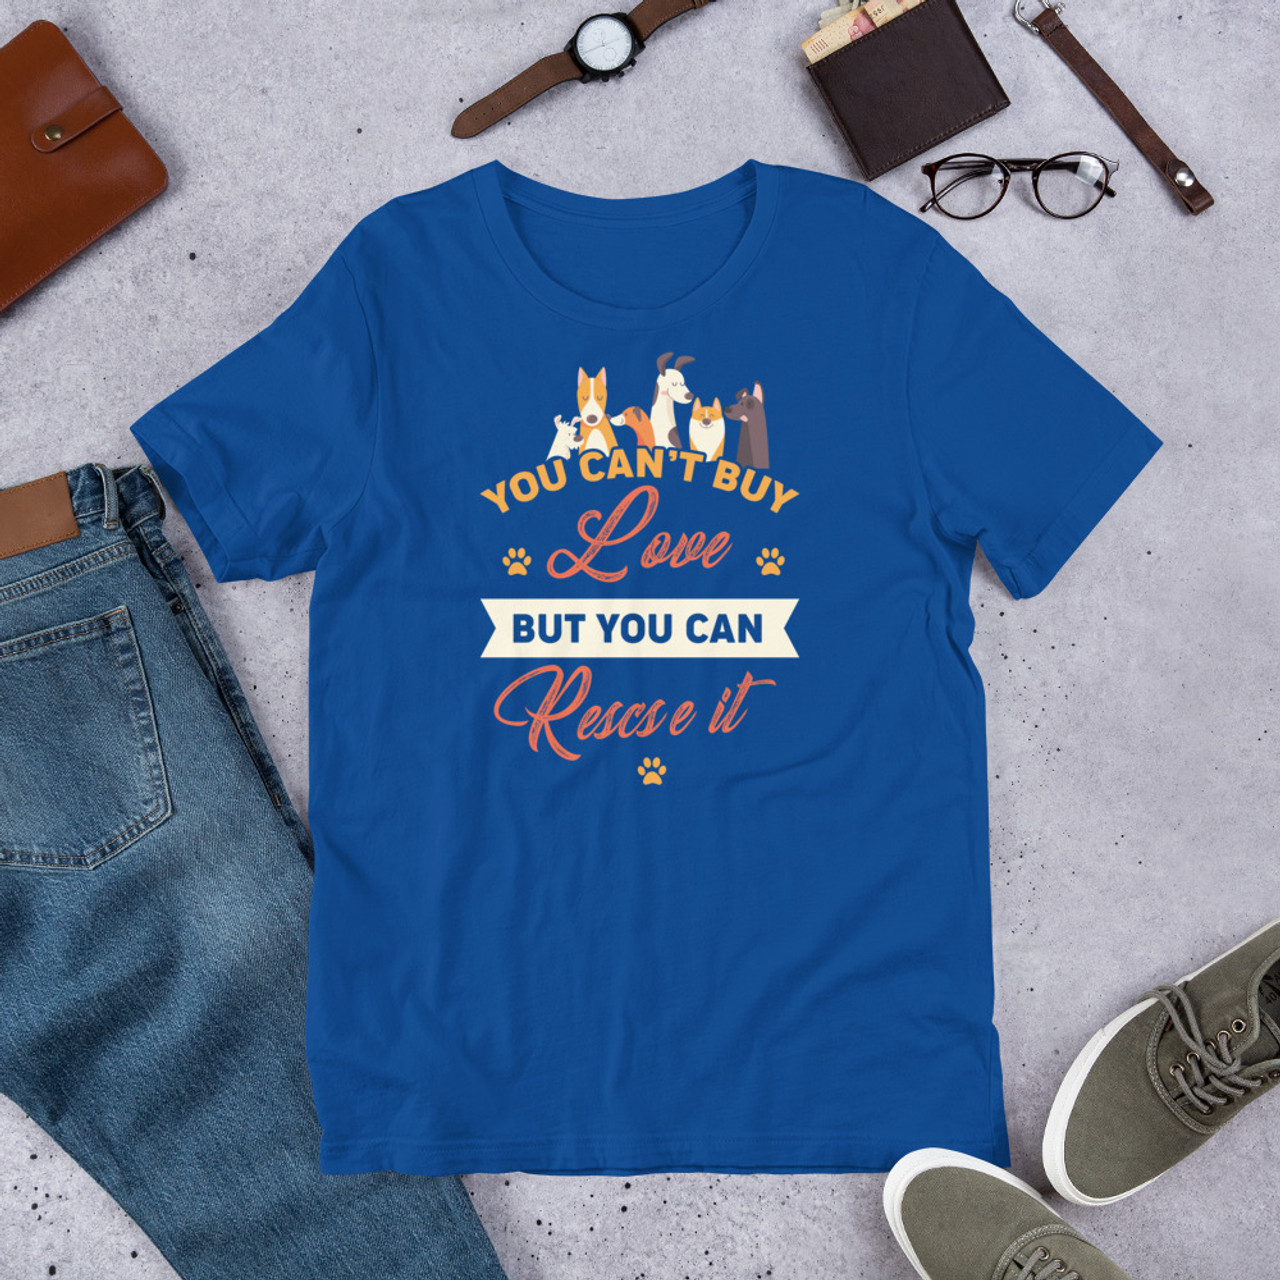 True Royal T-Shirt - Bella + Canvas 3001 You Can't Buy Love But You Can Rescue It